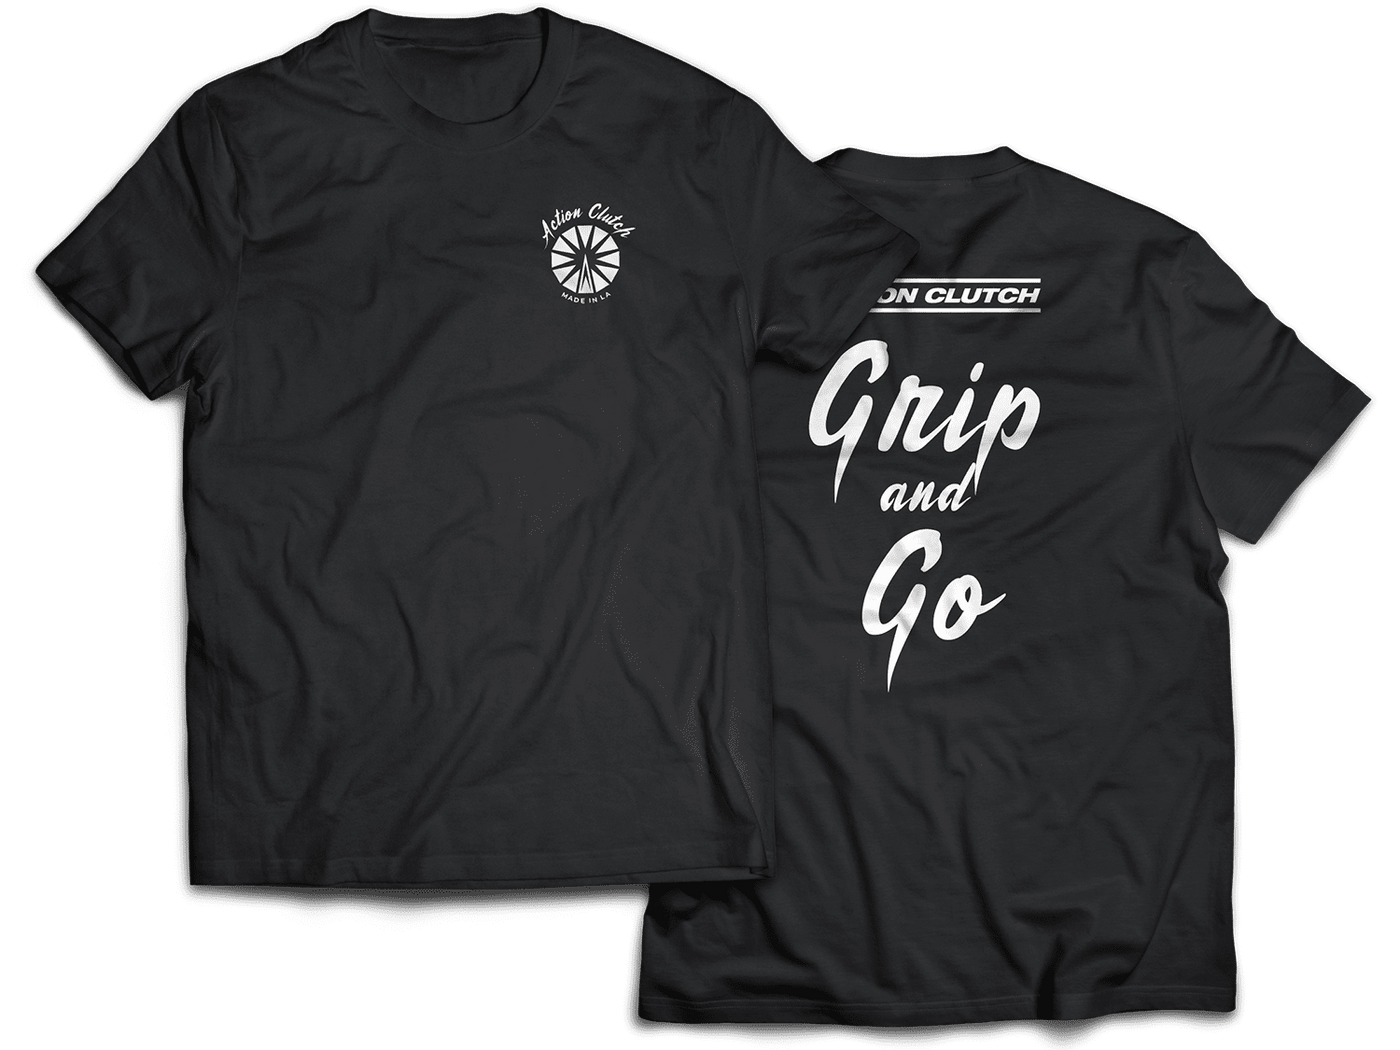 Action Clutch Grip and Go T-Shirt - Action Clutch